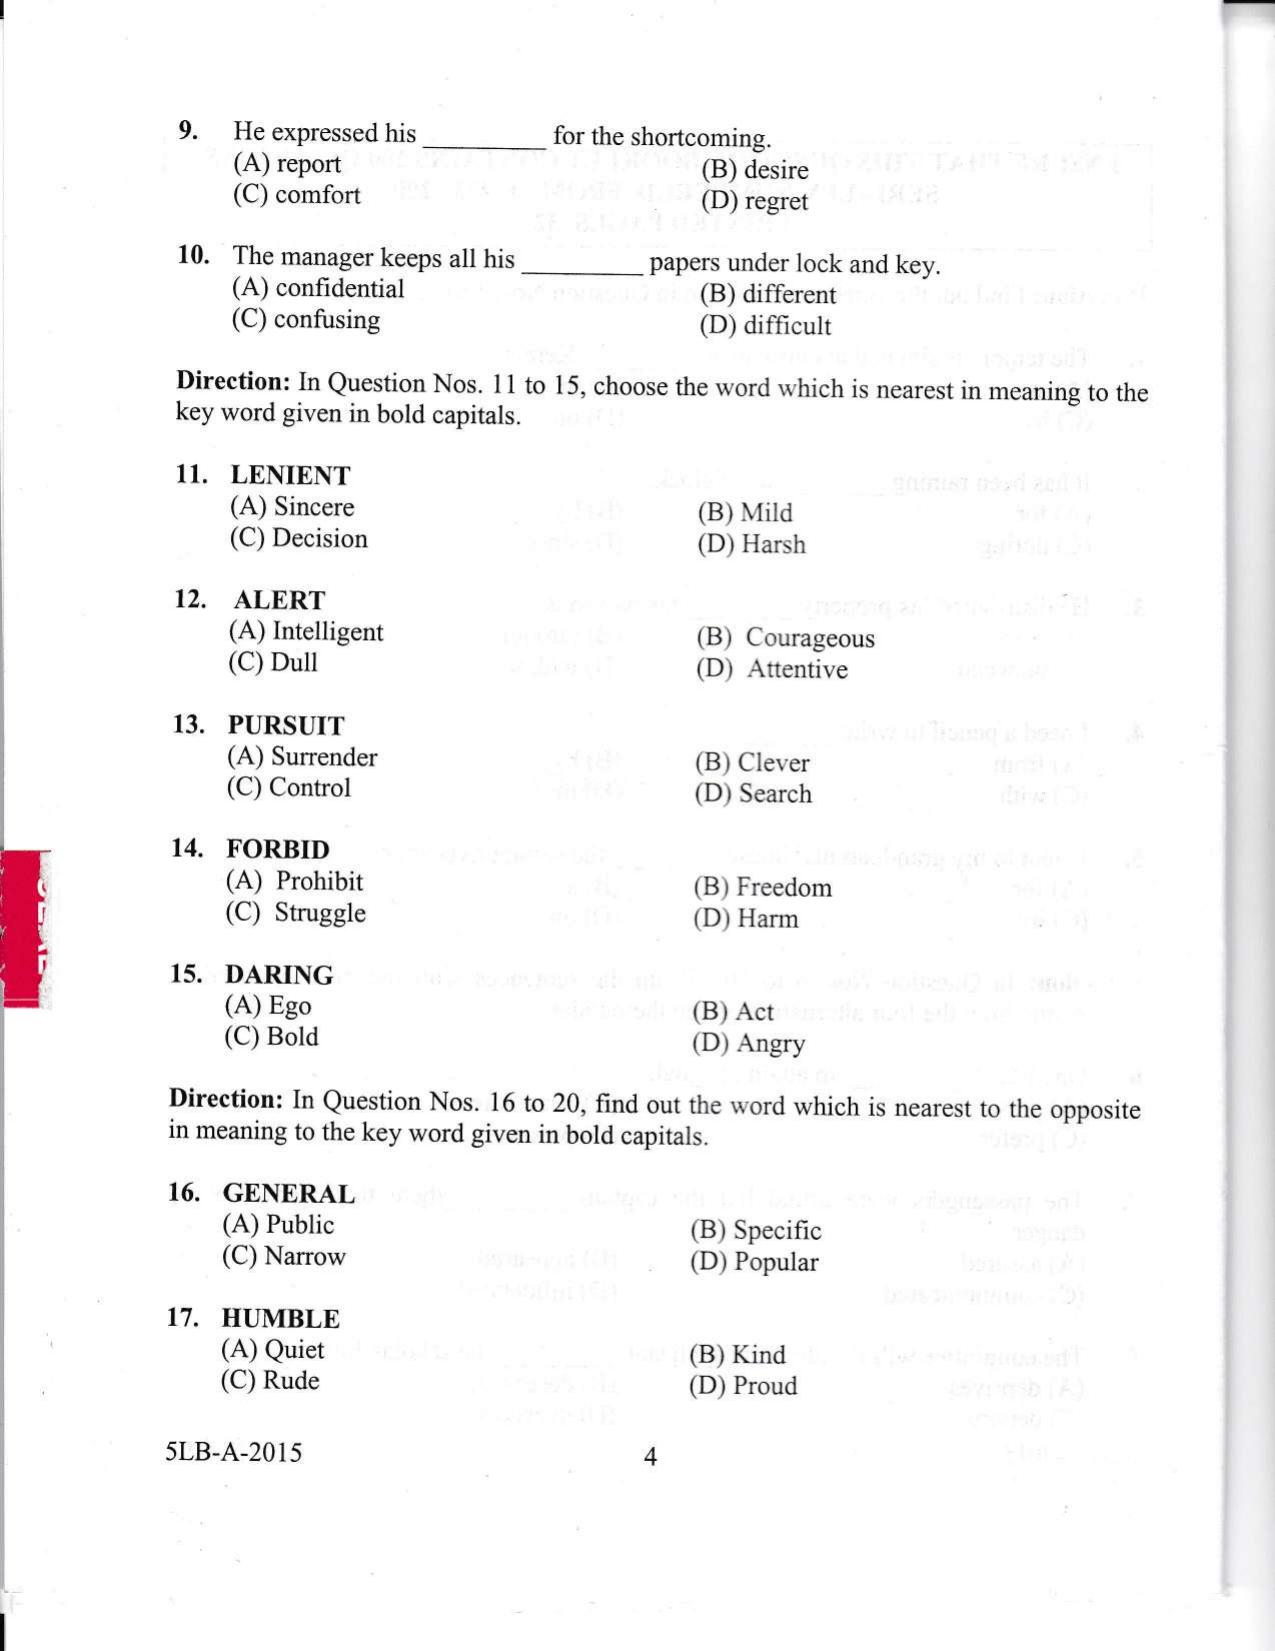 KLEE 5 Year LLB Exam 2015 Question Paper - Page 4